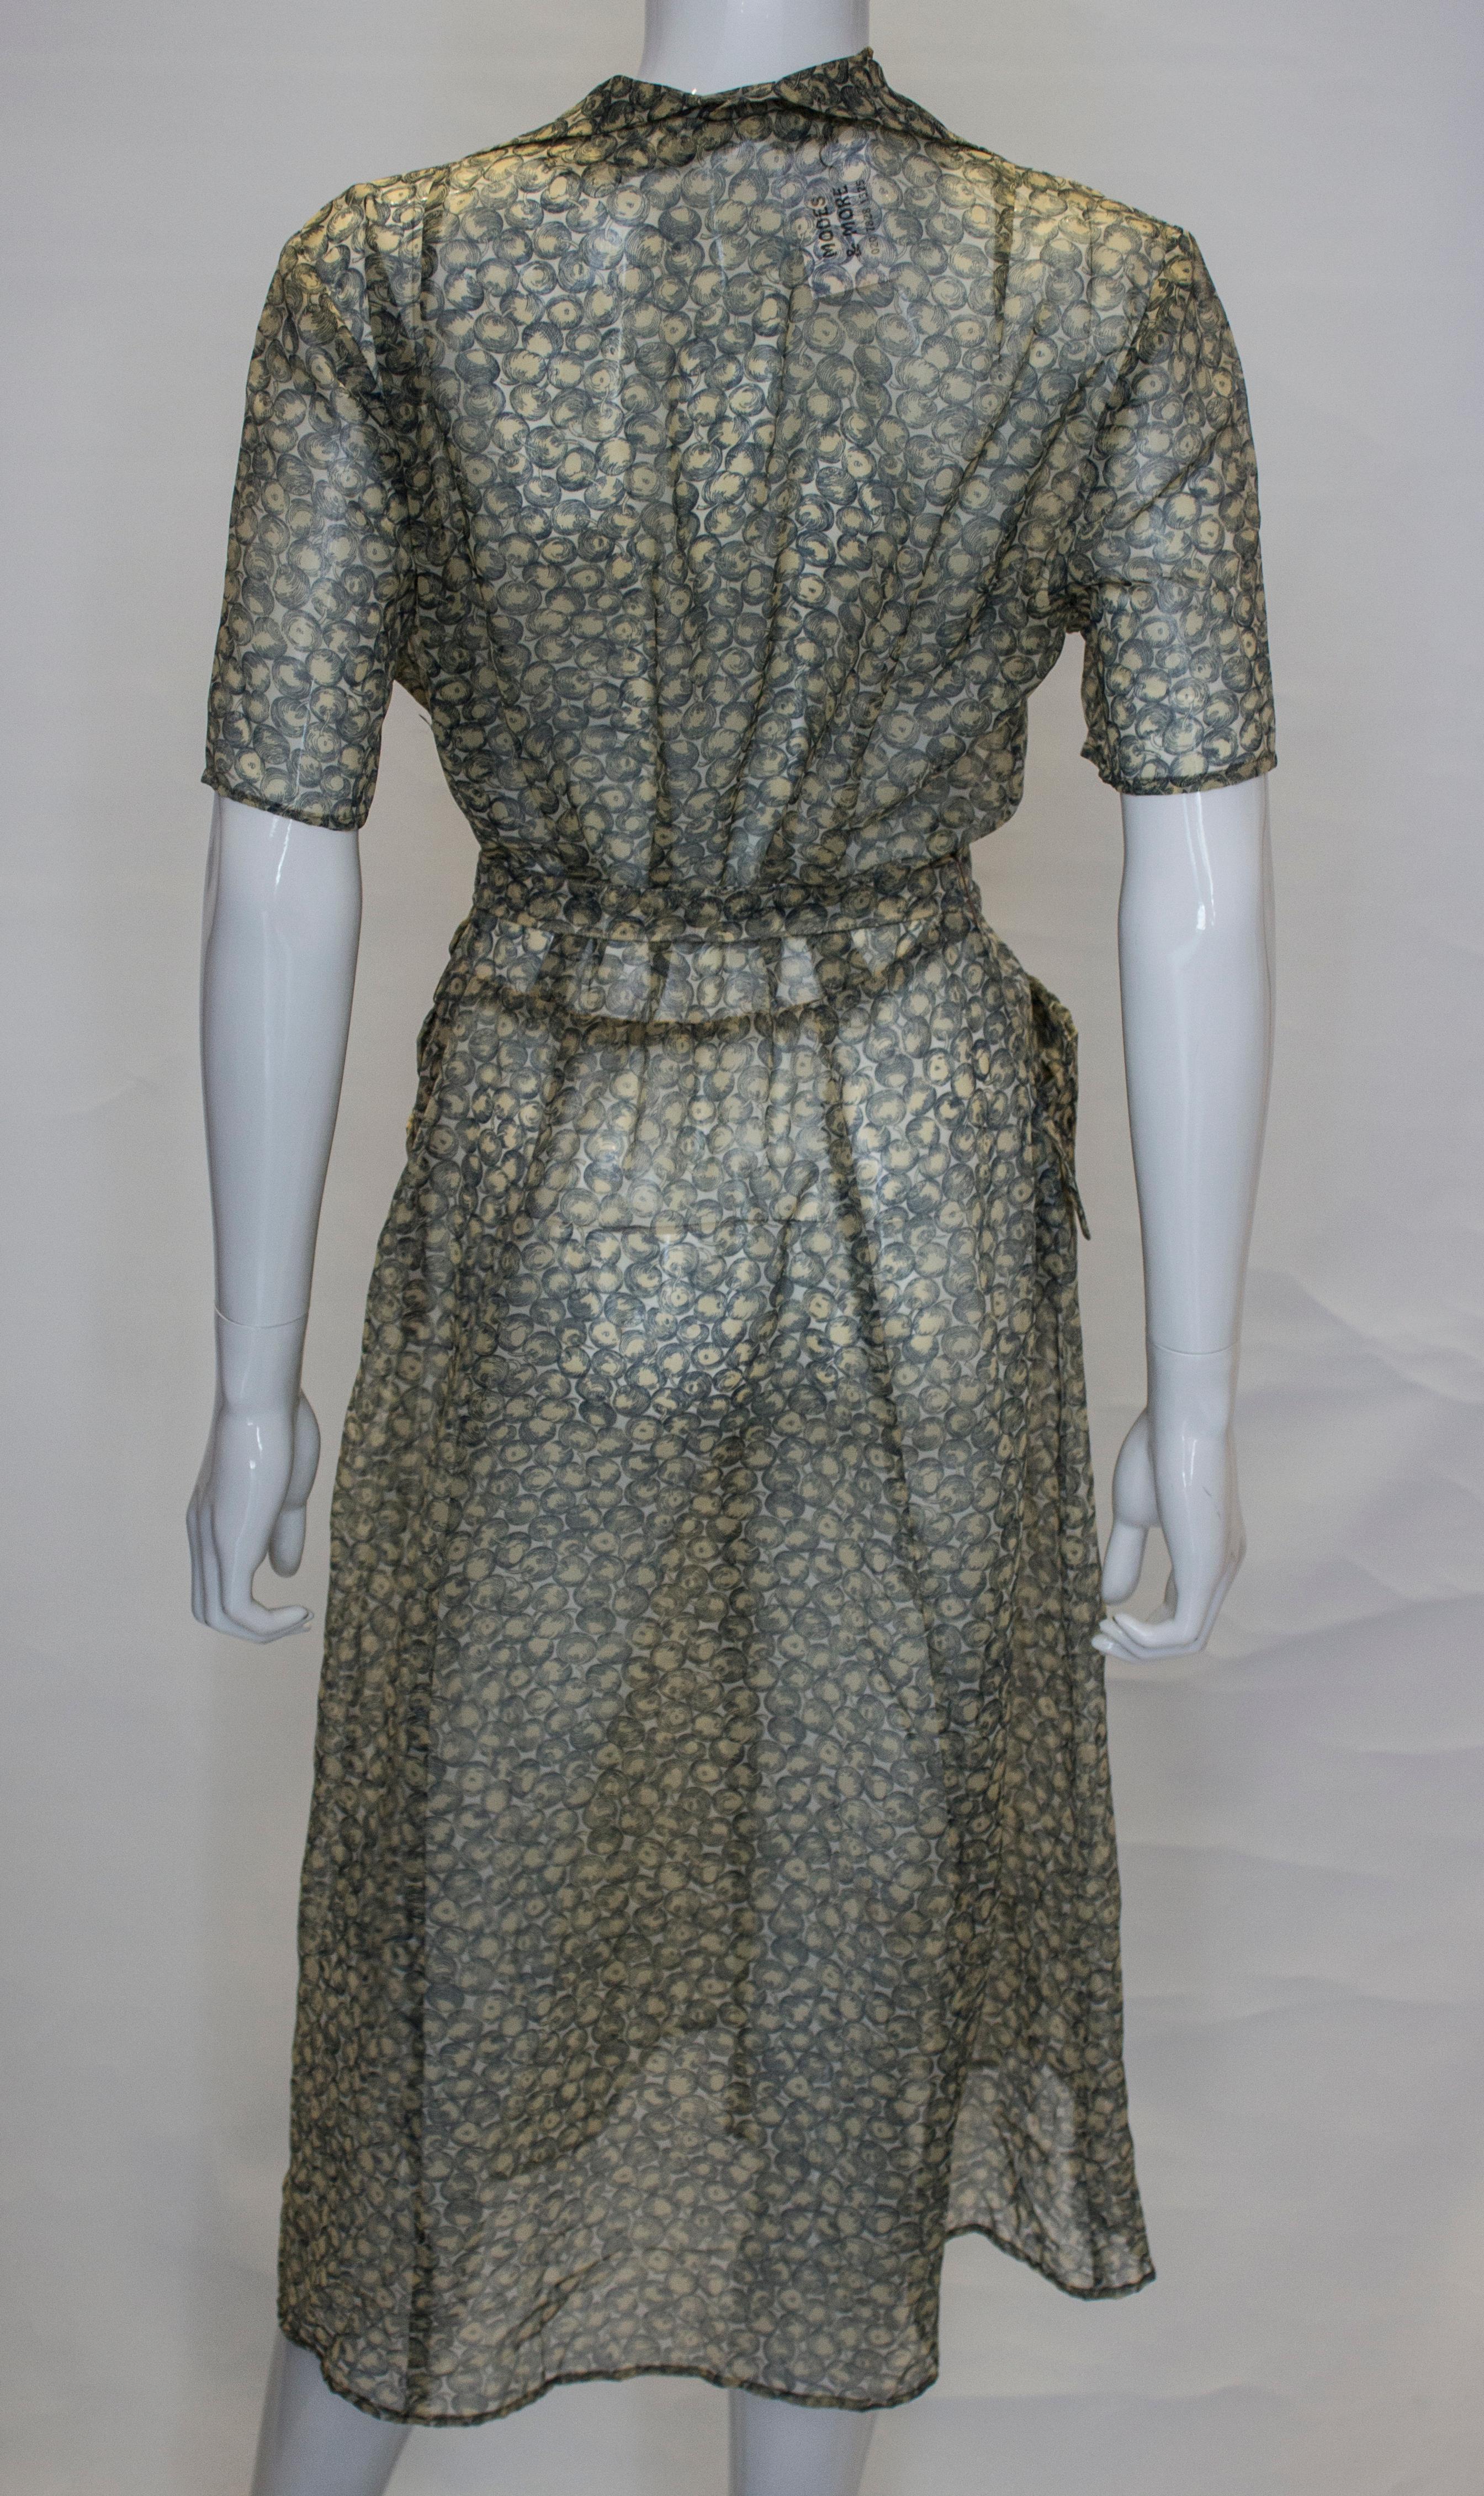 Vintage 1940s Apple Print Dress In Good Condition For Sale In London, GB